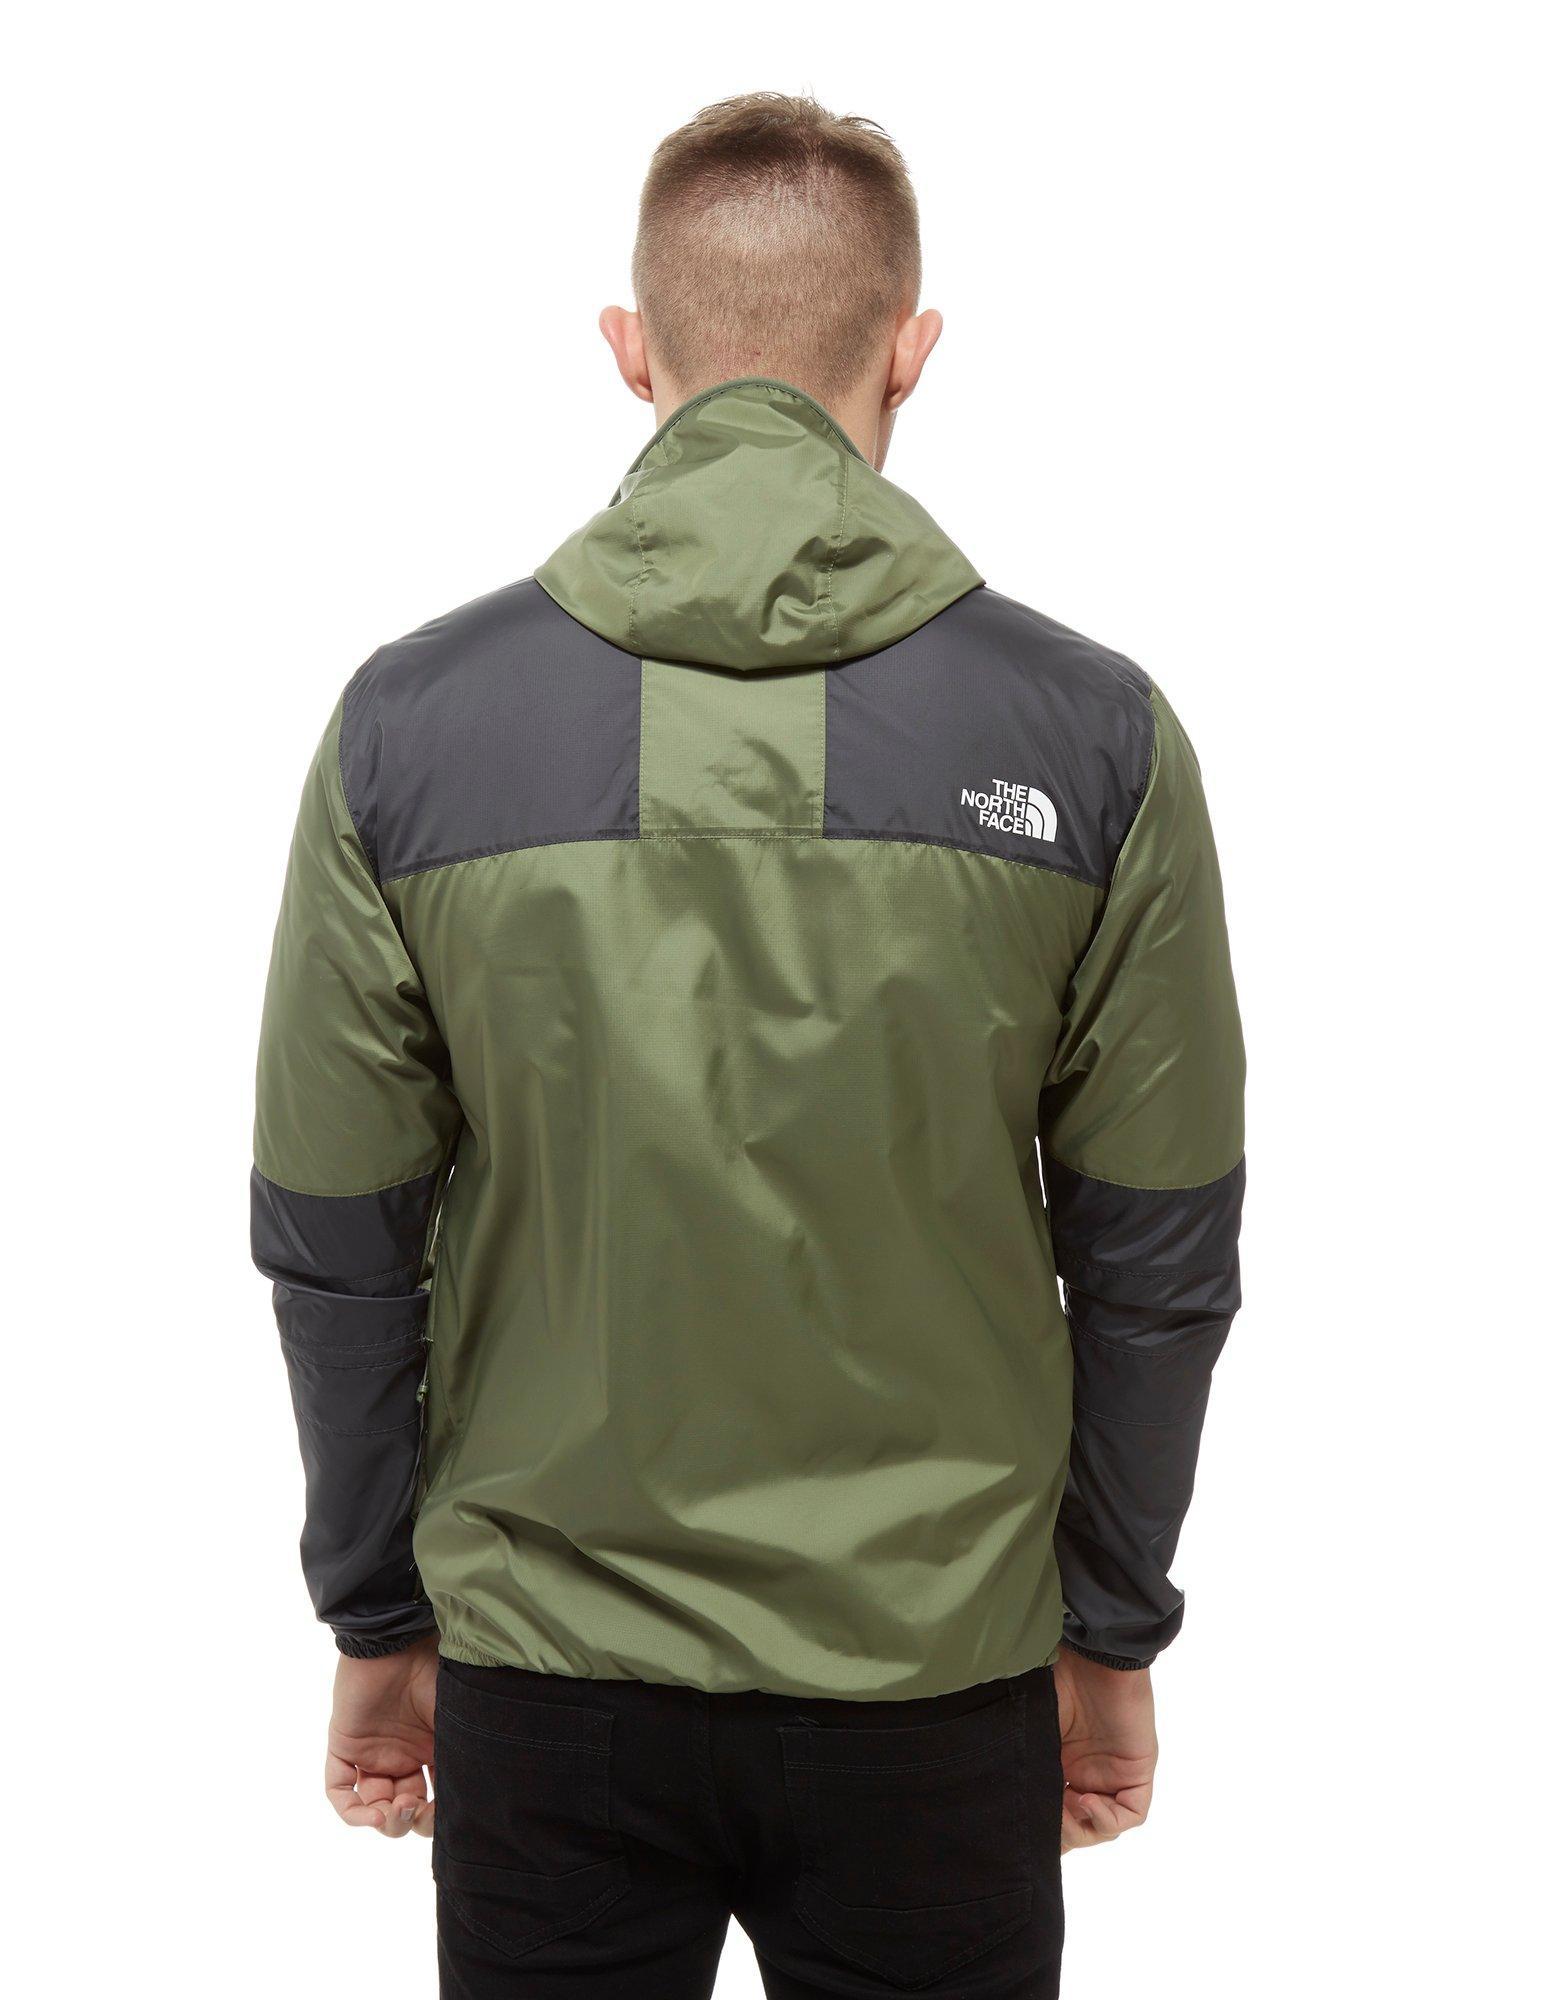 The North Face 1985 Jacket Top Sellers, SAVE 55%.